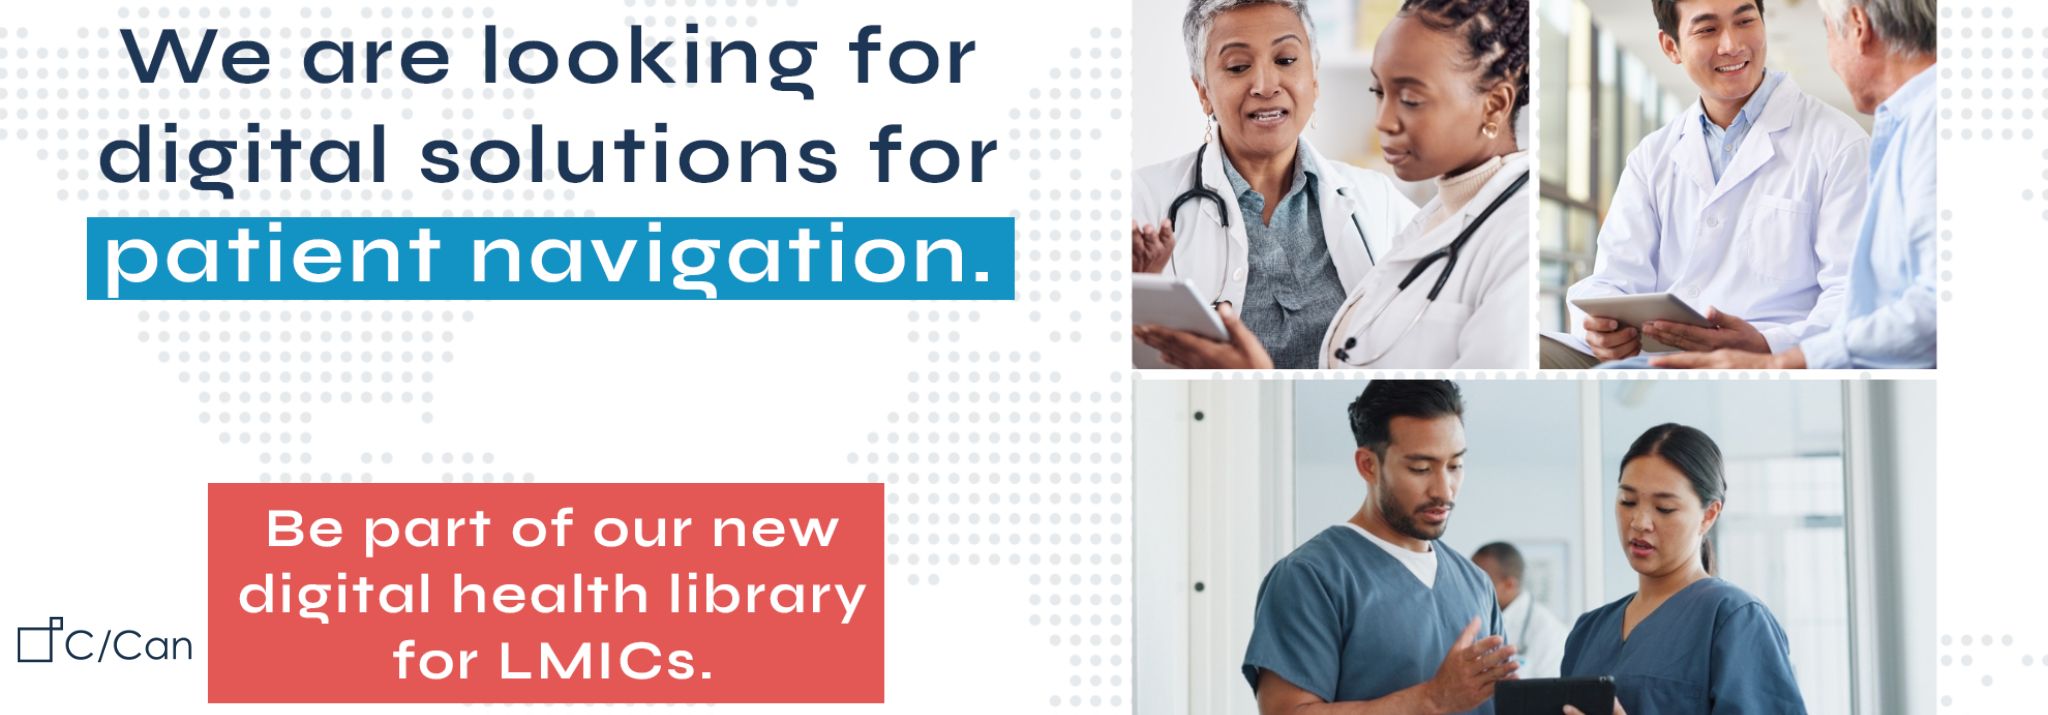 Call for submissions: Digital solutions for patient navigation